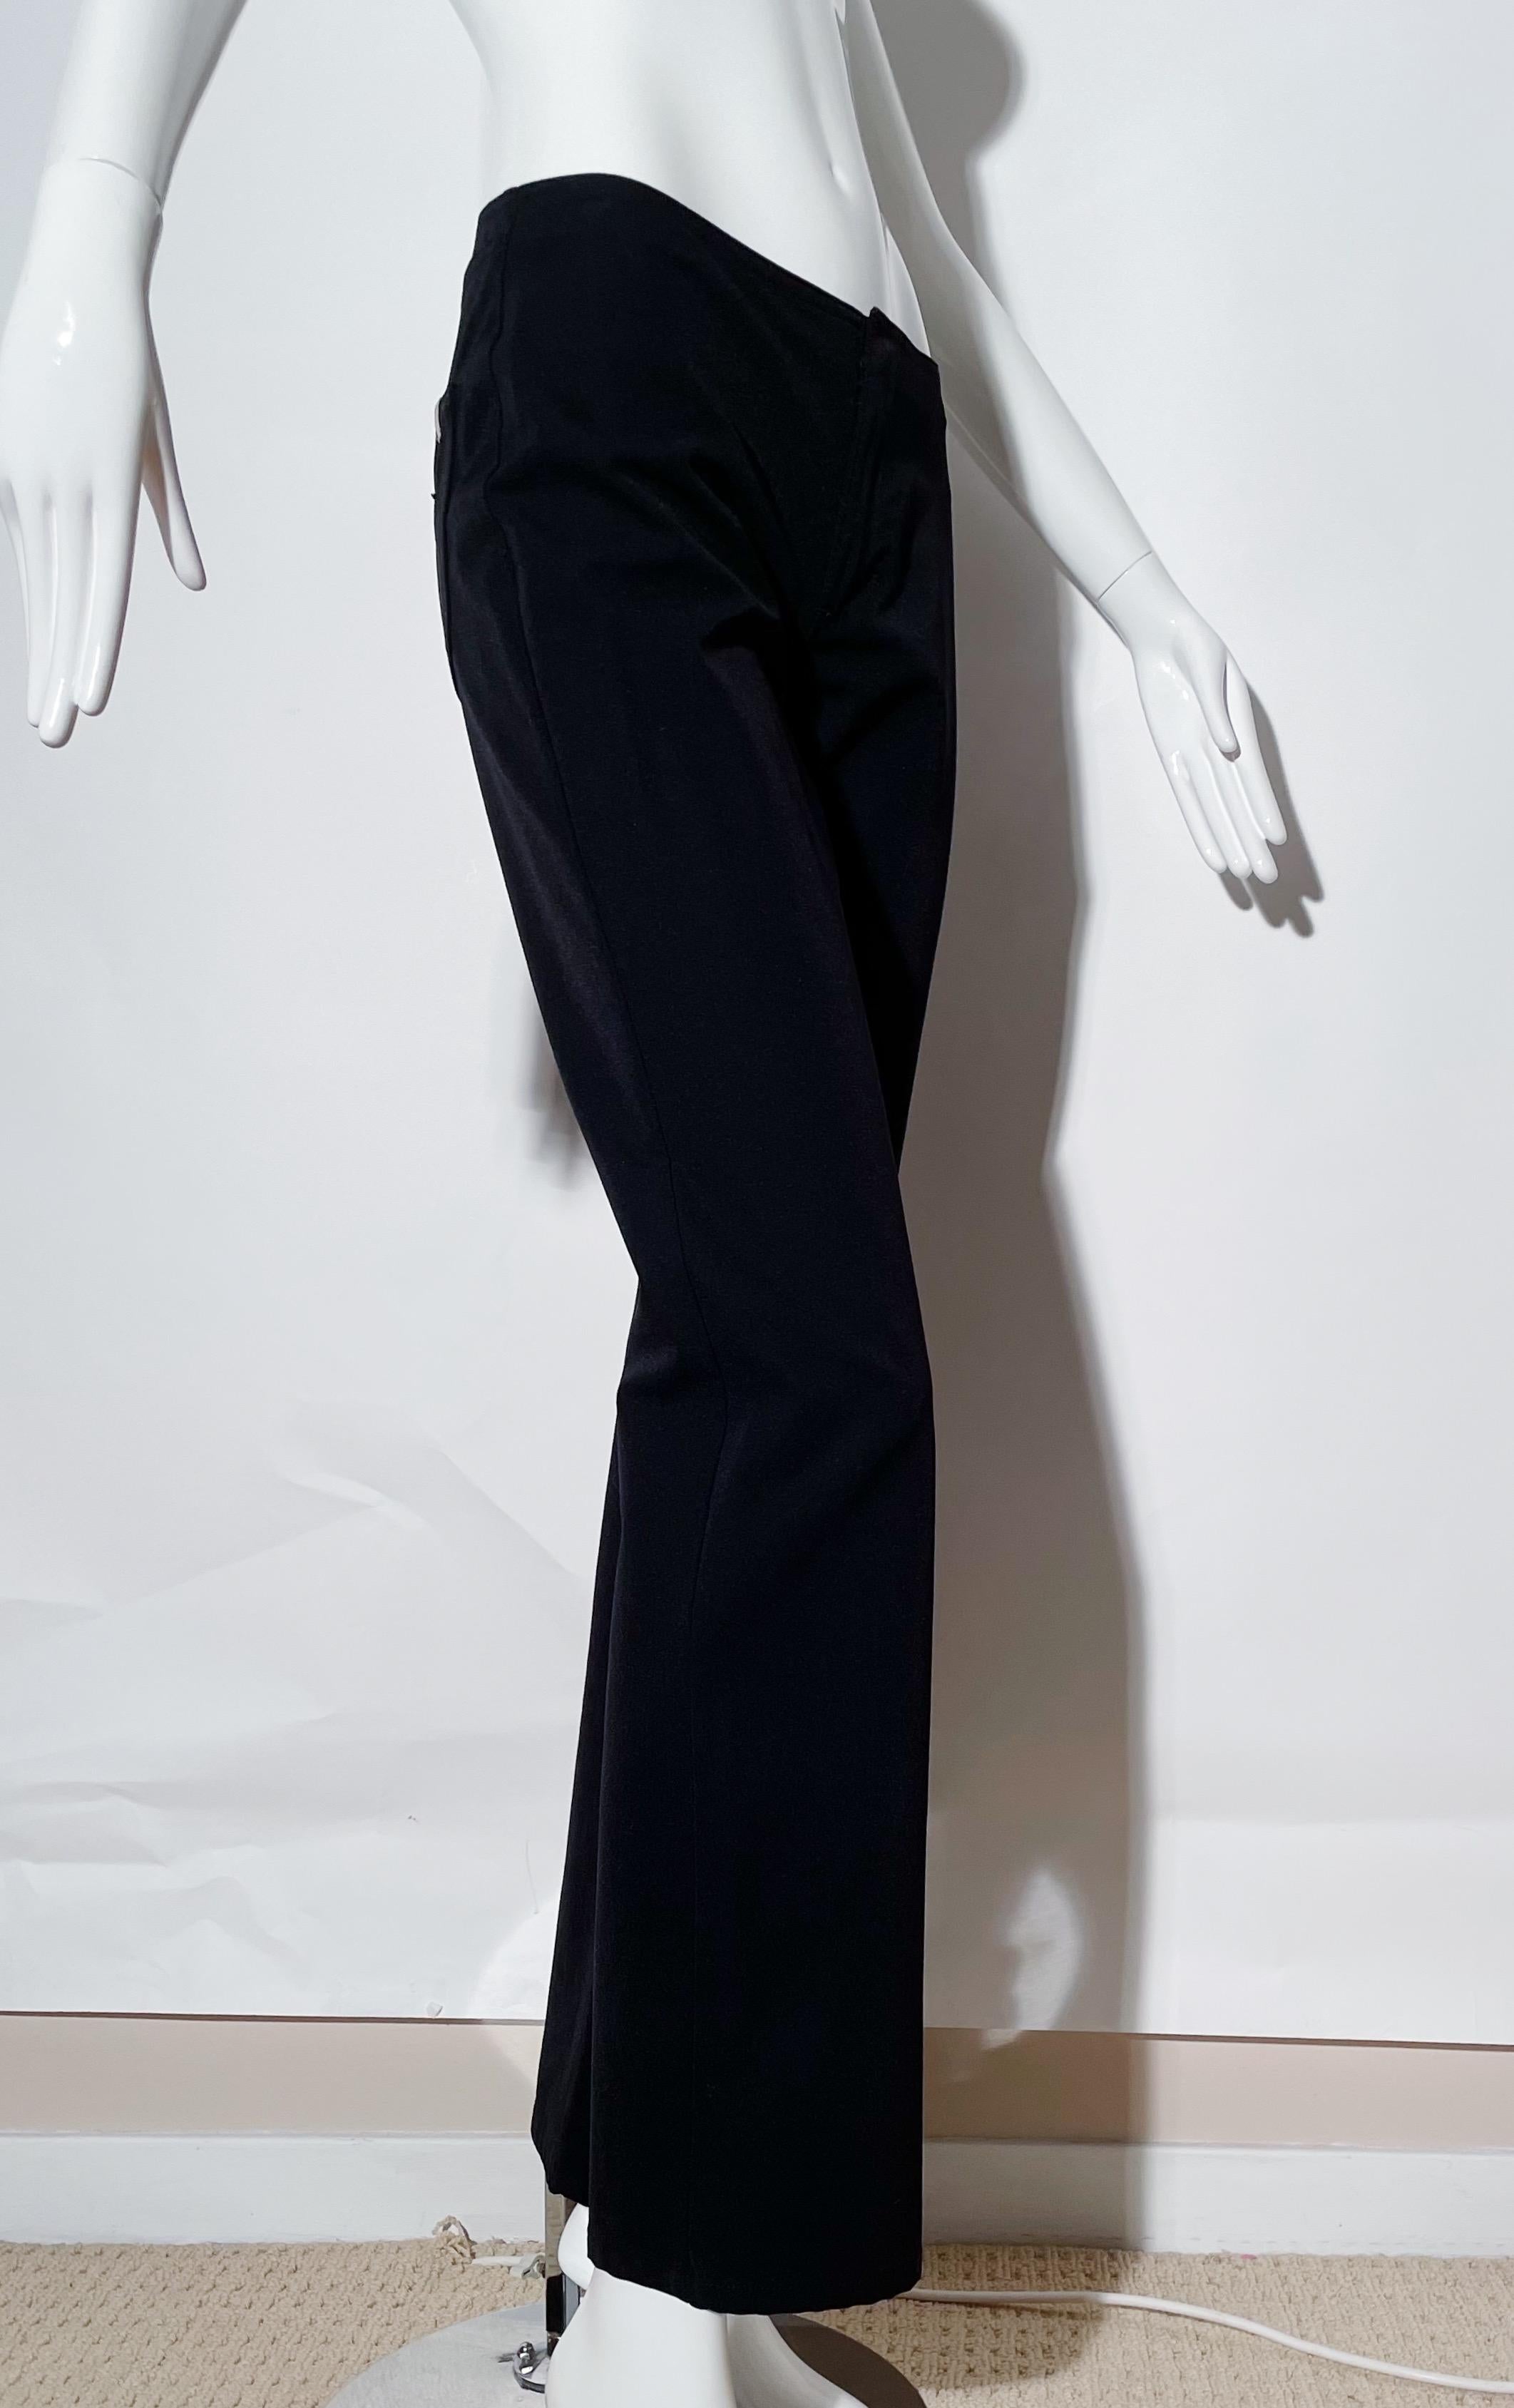 Gianfranco Ferre Low Rise Pants In Excellent Condition For Sale In Los Angeles, CA